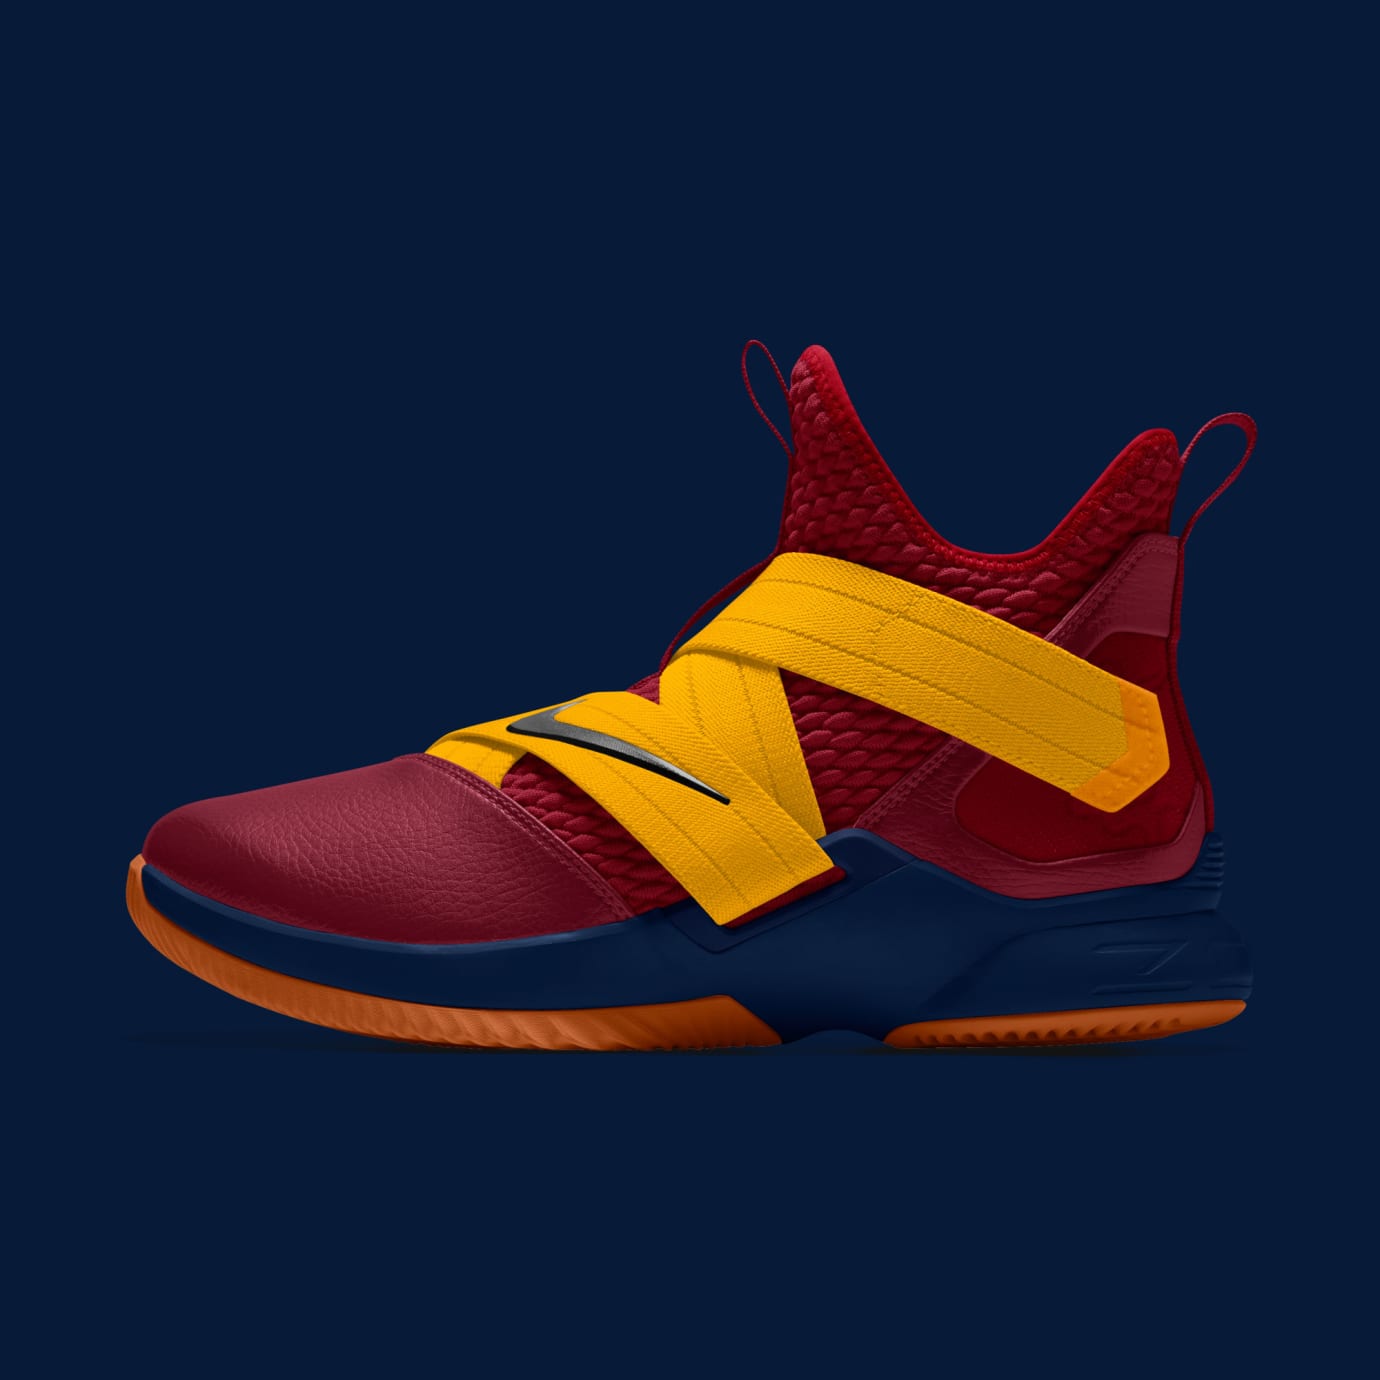 lebron soldier 12 by you cheap online